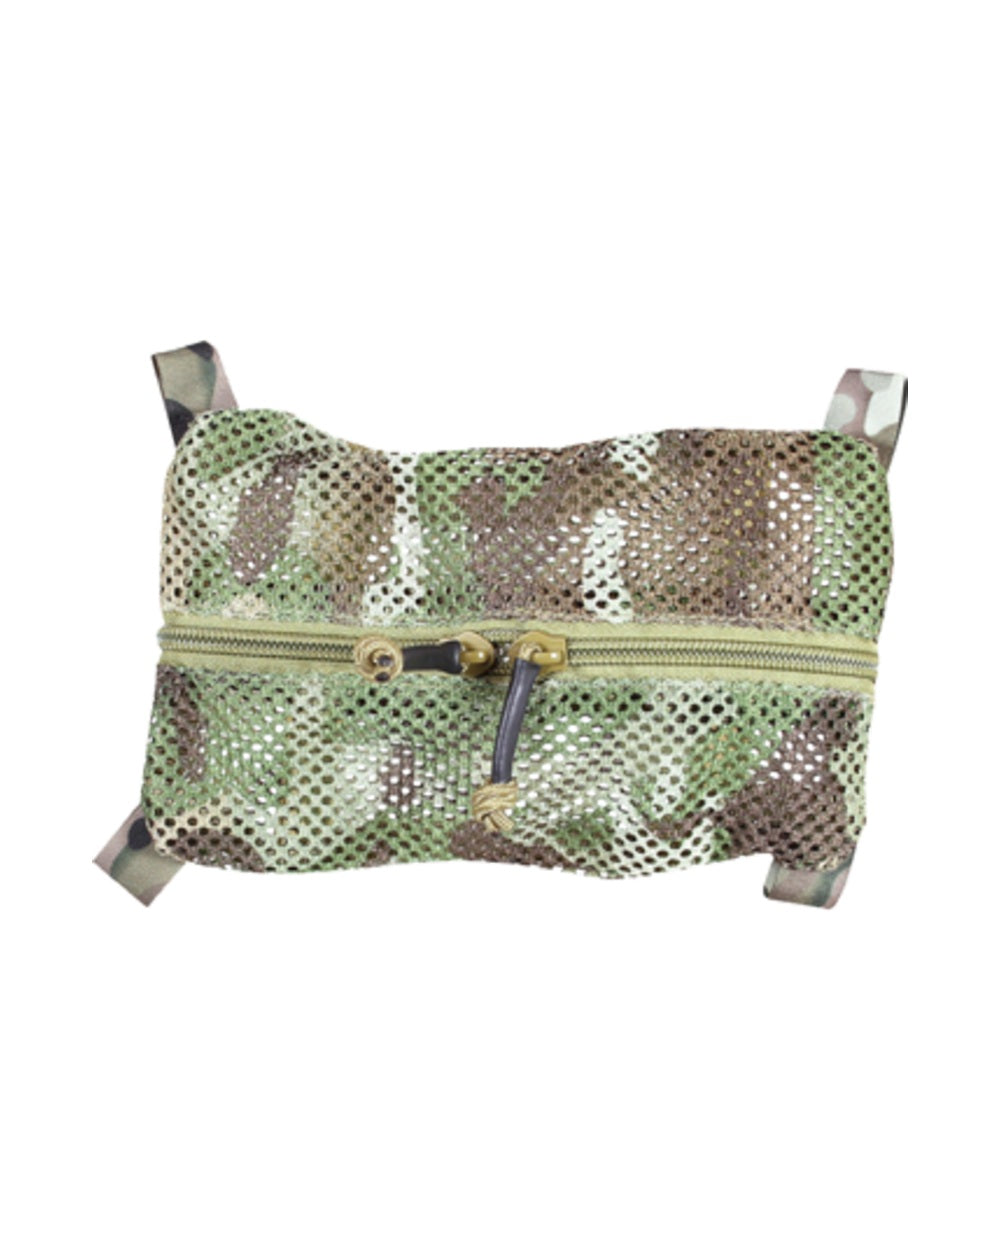 Viper Mesh Stow Bag Small in VCAM 